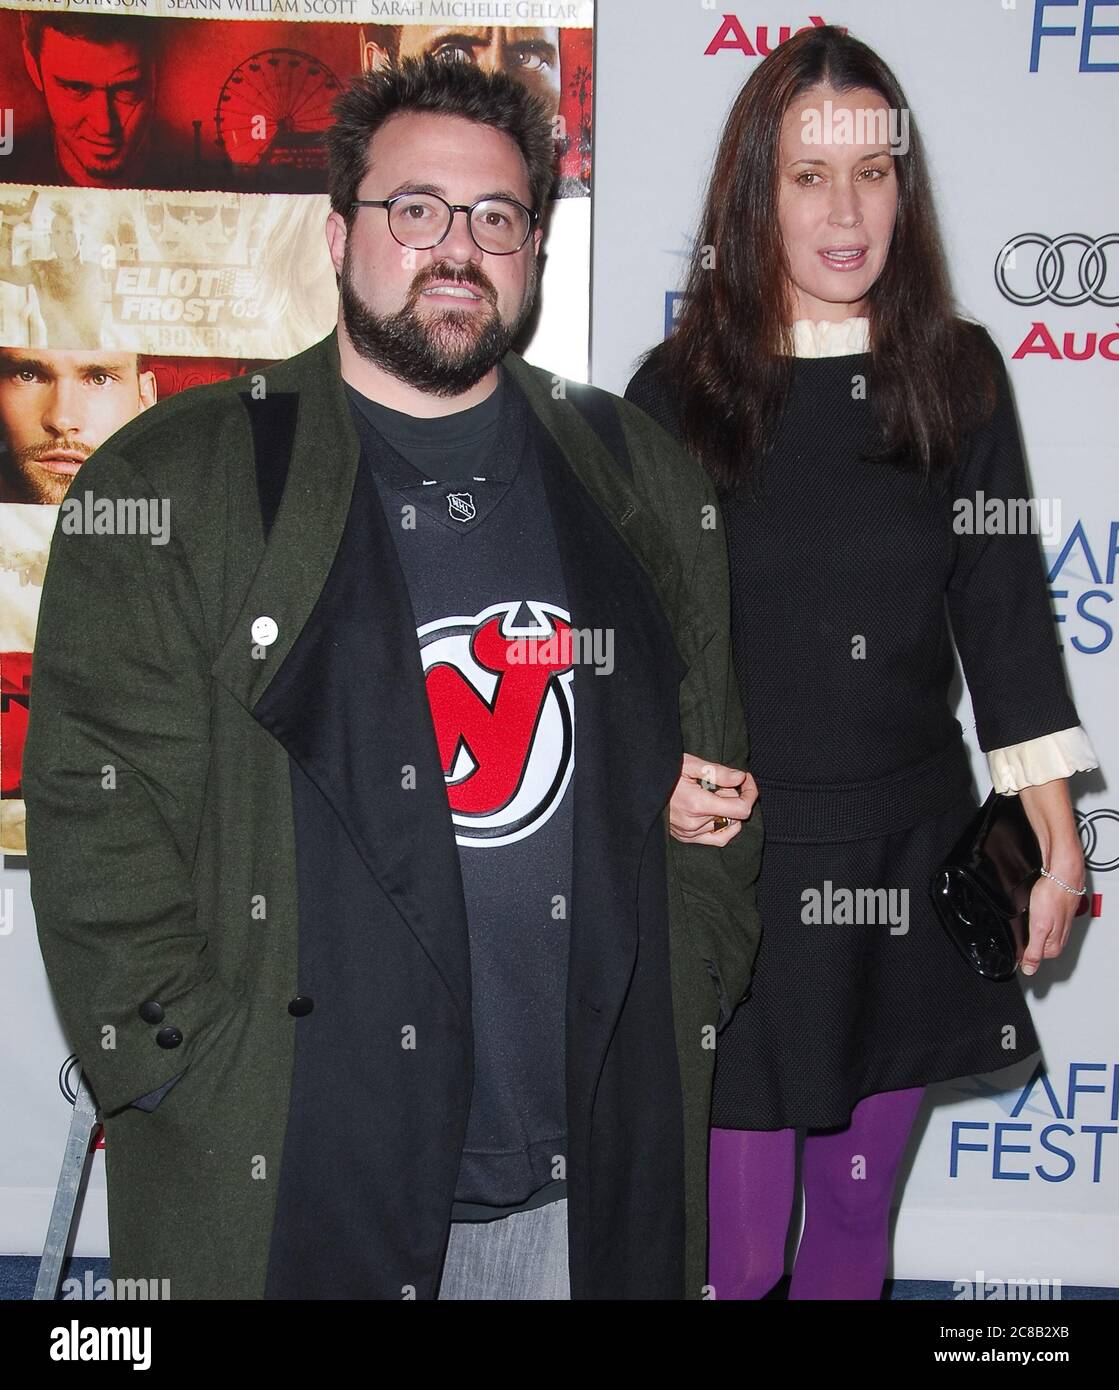 Kevin Smith and Wife Jennifer Schwalbach Smith at the AFI FEST 2007 Presents a Screening of 'Southland Tales' held at the AFI Fest Rooftop Village of the Arclight Cinemas in Hollywood, CA. The event took place on Friday, November 2, 2007. Photo by: SBM / PictureLux - File Reference # 34006-10574SBMPLX Stock Photo